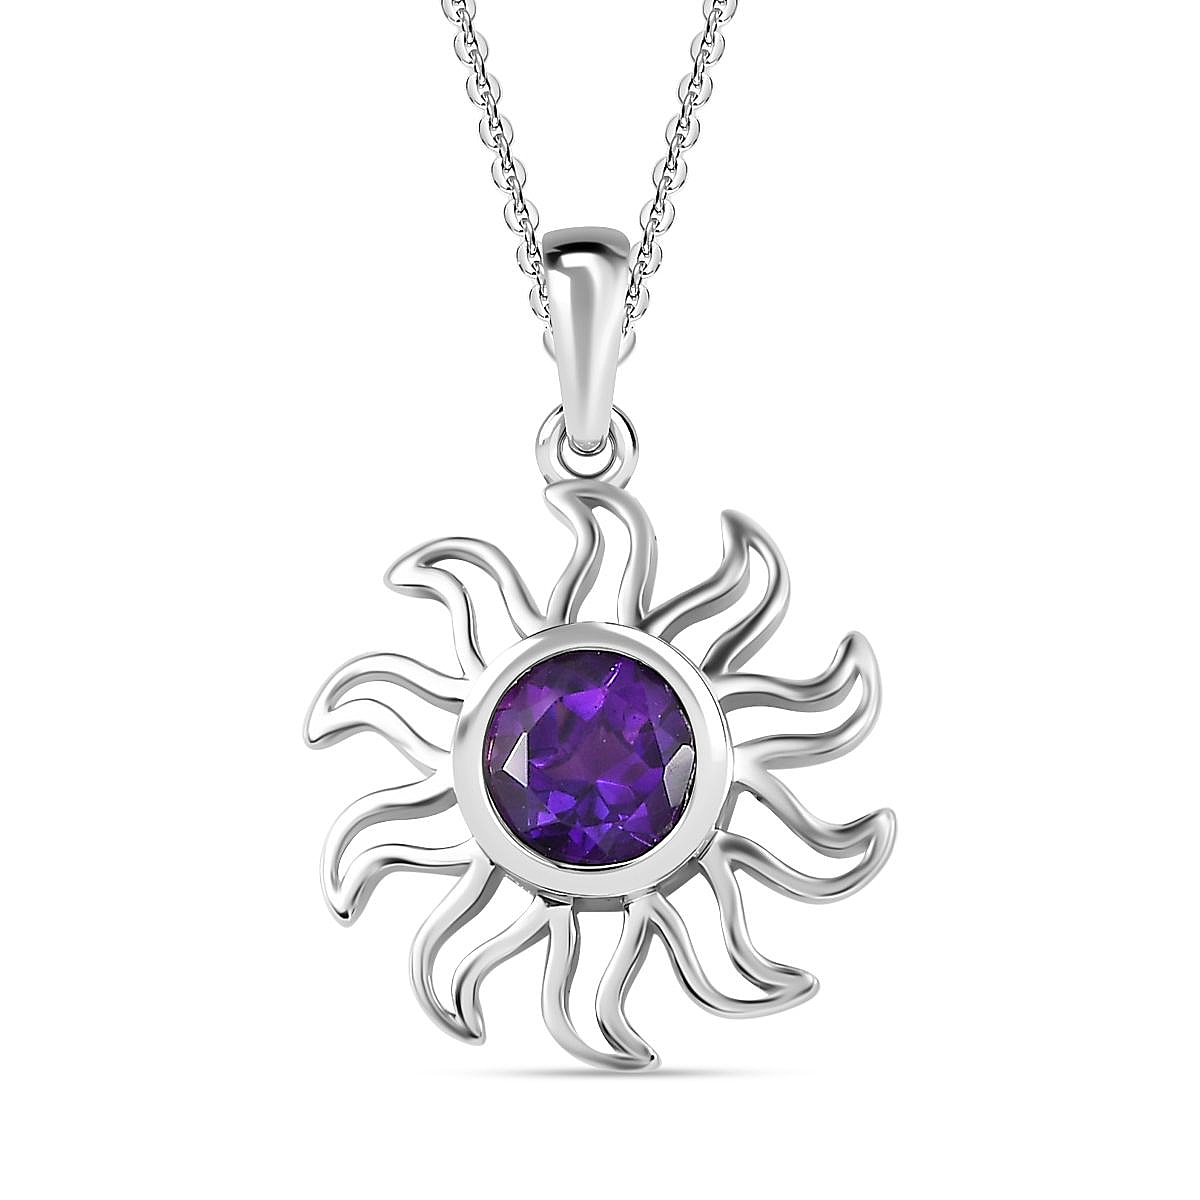 Moroccan Amethyst Solitaire Sun Pendant with Chain (Size 20) in Platinum Overlay Sterling Silver 1.25 Ct.